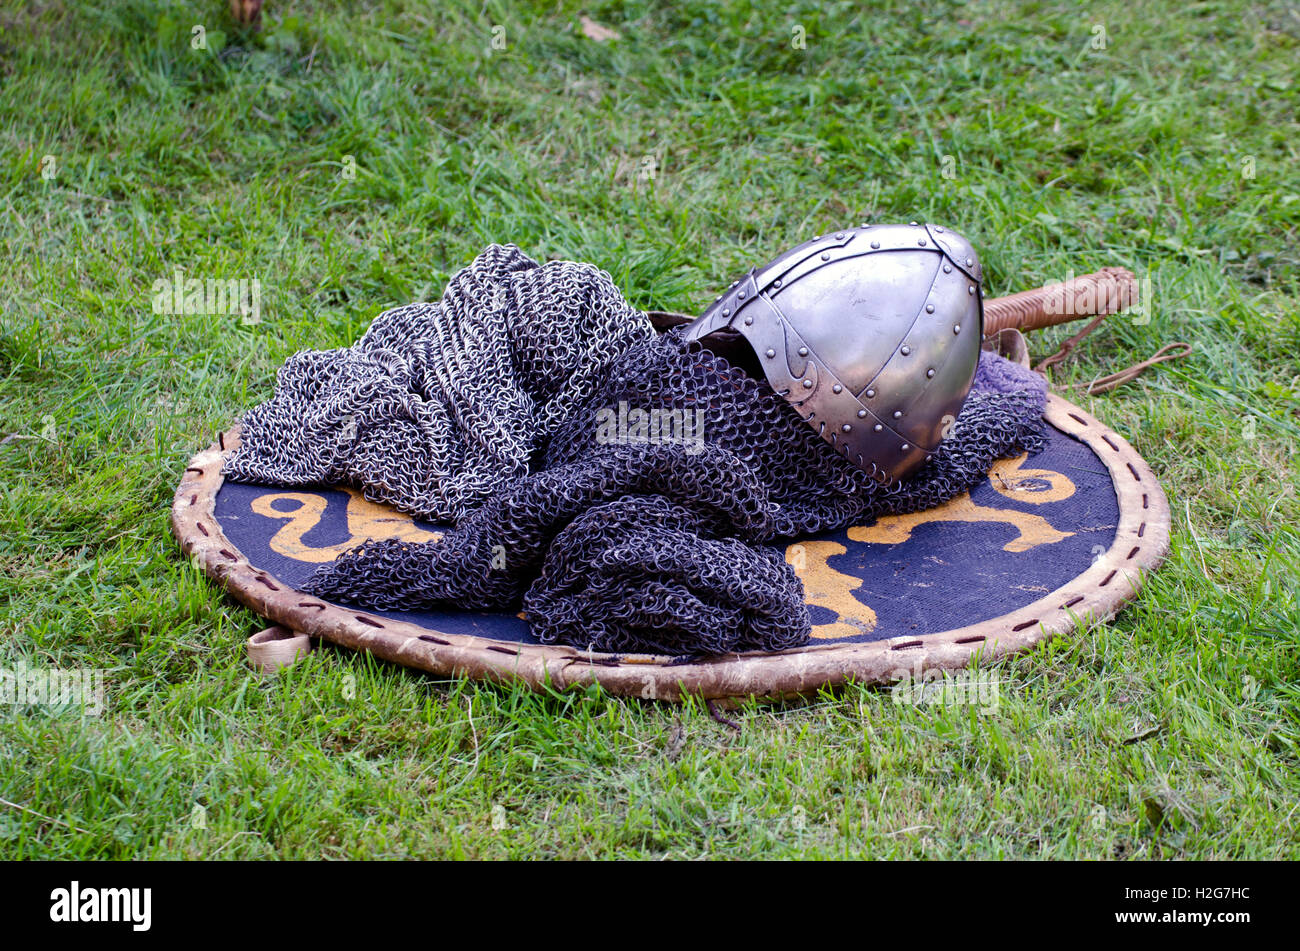 Knight armor headpiece placed on shield on grass at medieval festival Stock Photo